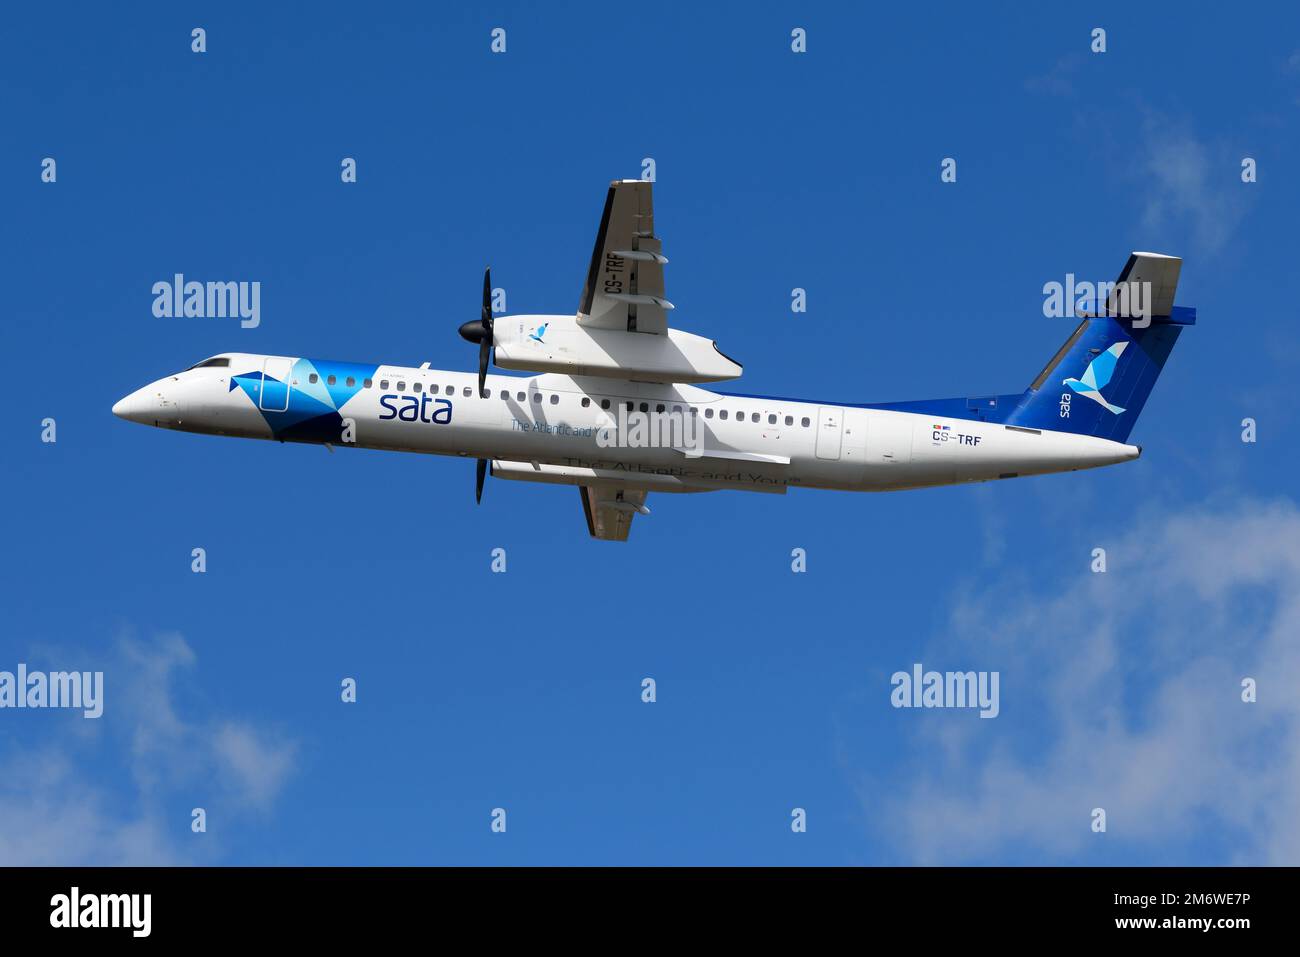 Azores Airlines DHC-8 series aircraft flying. Airplane De Havilland Dash 8 Q400 of Açores Airlines, previously know as SATA Air Acores. Stock Photo